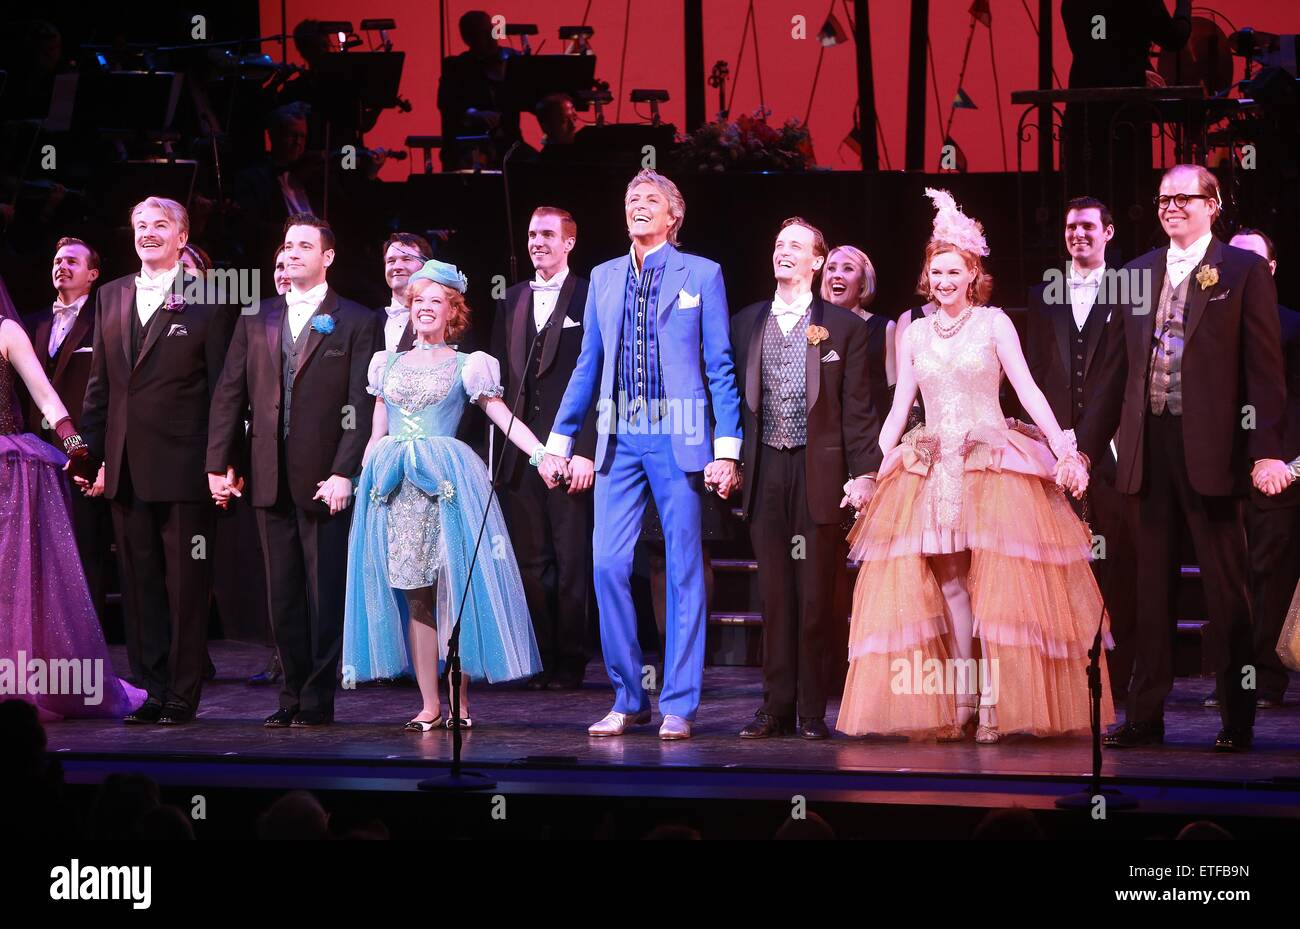 Closing night curtain call for Encores! production of Lady Be Good at NY City Center.  Featuring: Douglas Sills, Colin Donnell, Patti Murin, Tommy Tune, Danny Gardner, Erin Mackey, Jeff Hiller Where: New York, New York, United States When: 09 Feb 2015 Credit: Joseph Marzullo/WENN.com Stock Photo